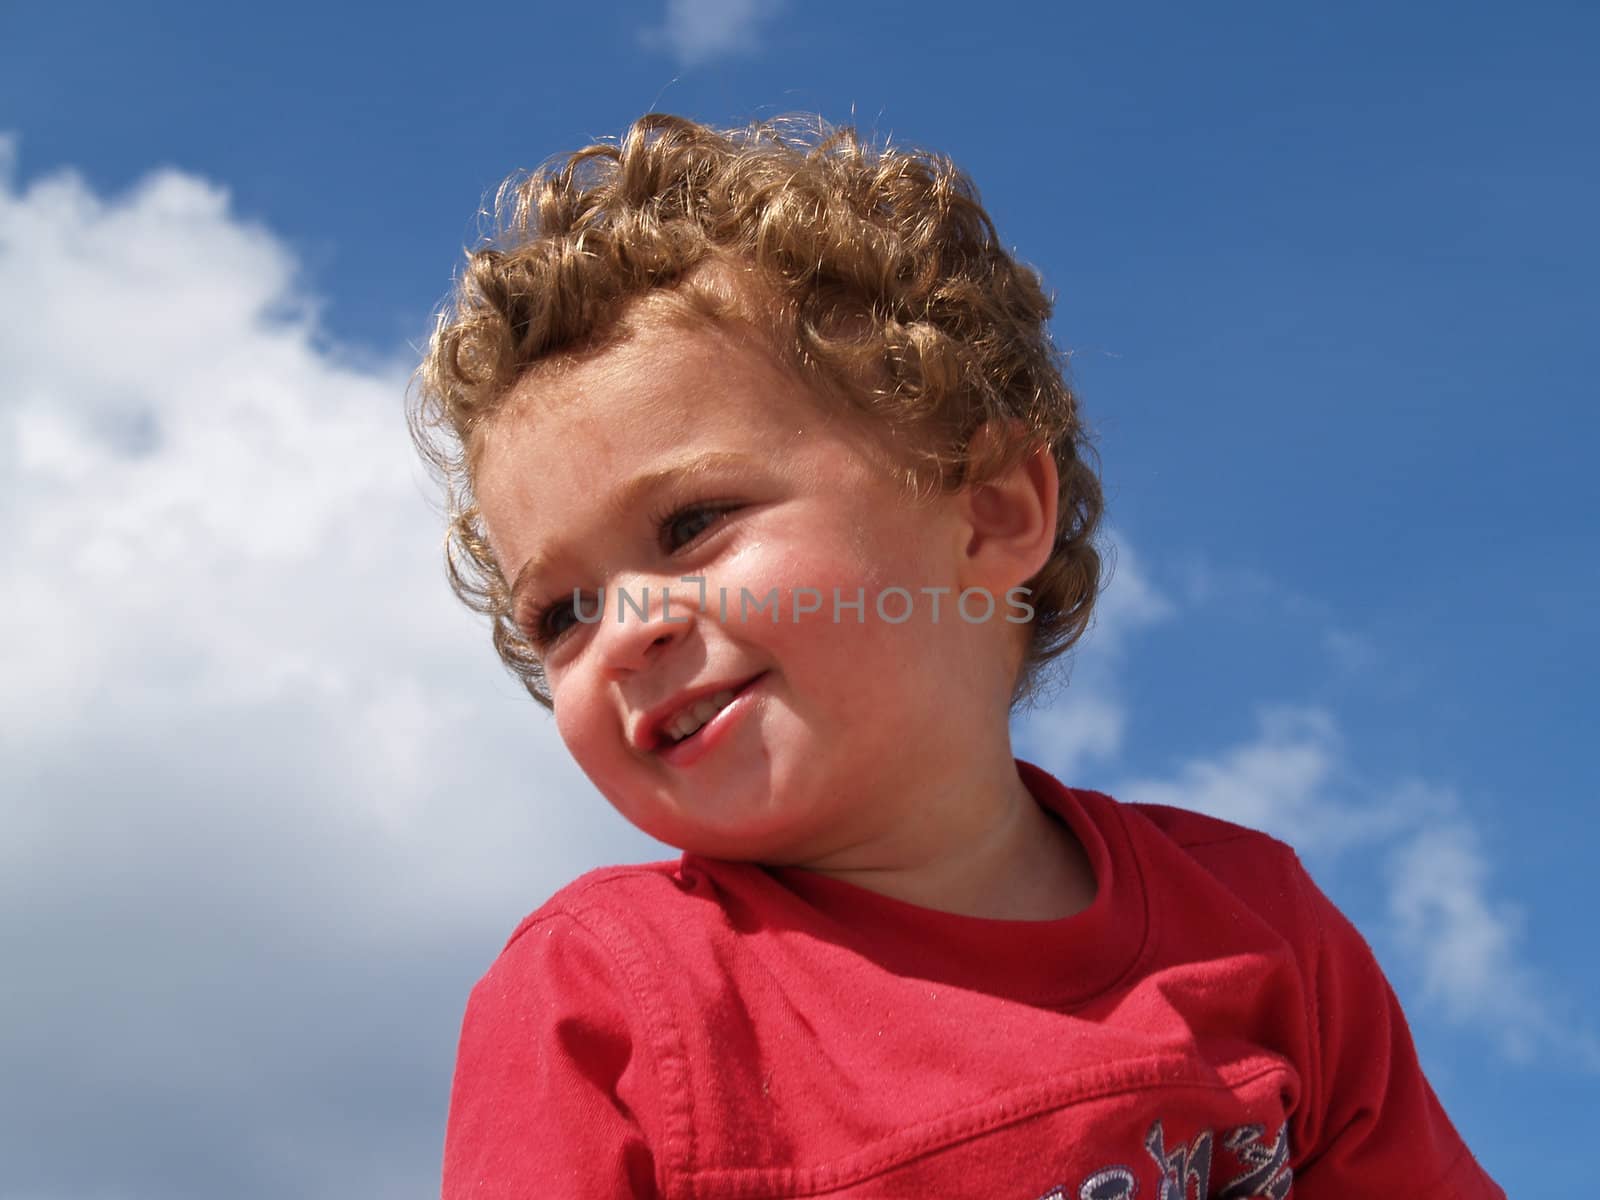 Smiling boy against sky by brians101